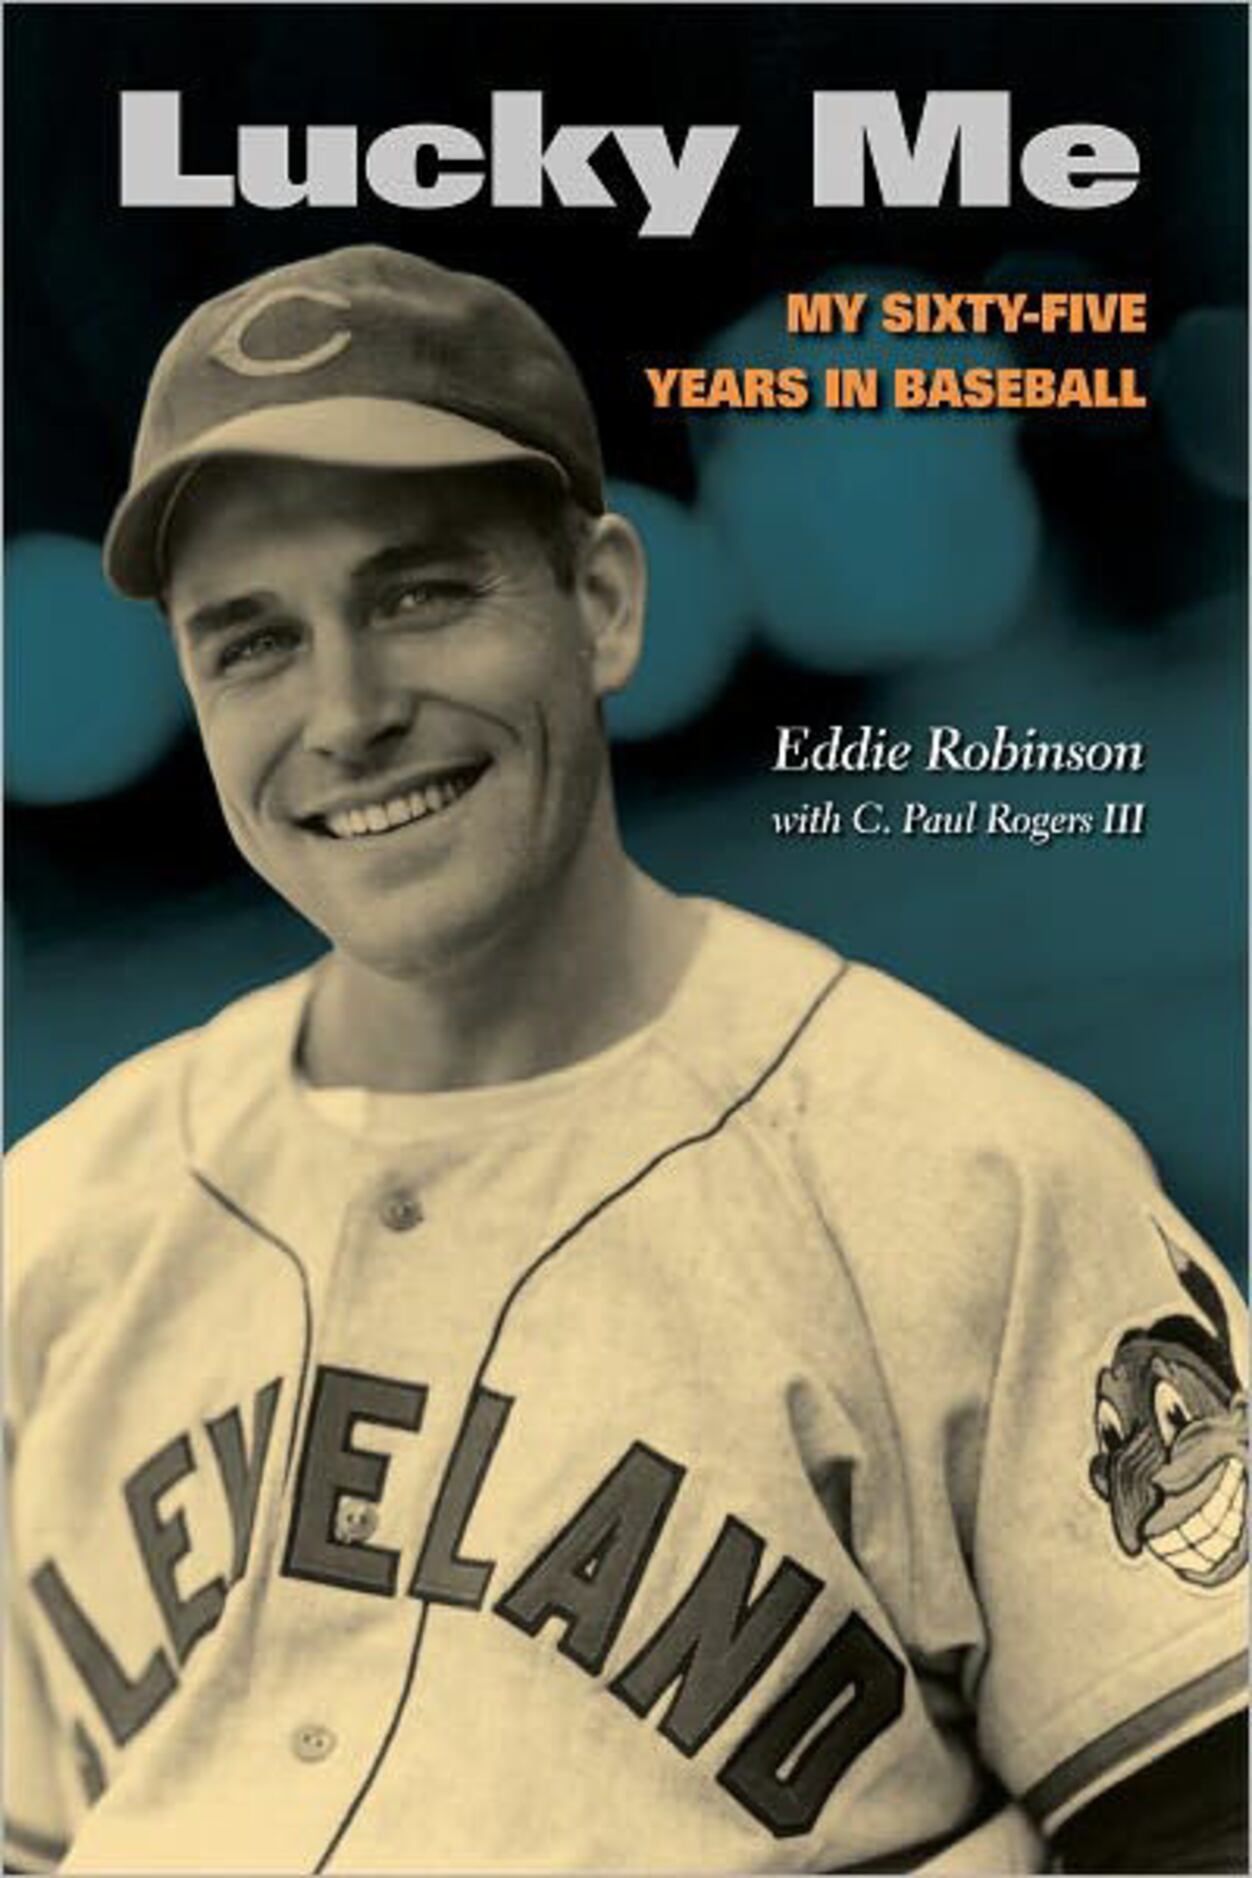 Eddie Robinson dies at 100 years old, was oldest living major-league player  - Sports Illustrated